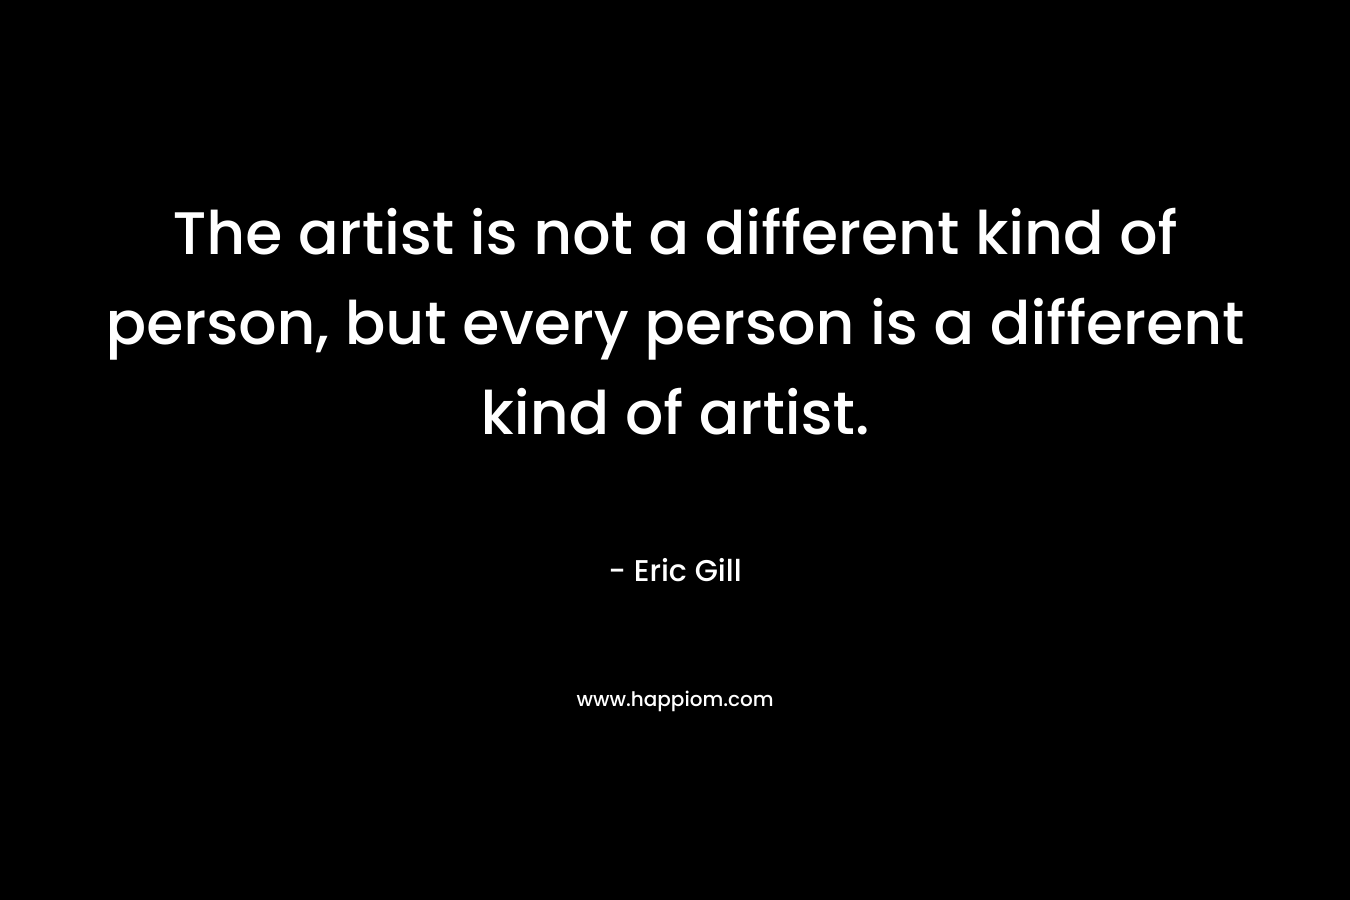 The artist is not a different kind of person, but every person is a different kind of artist.